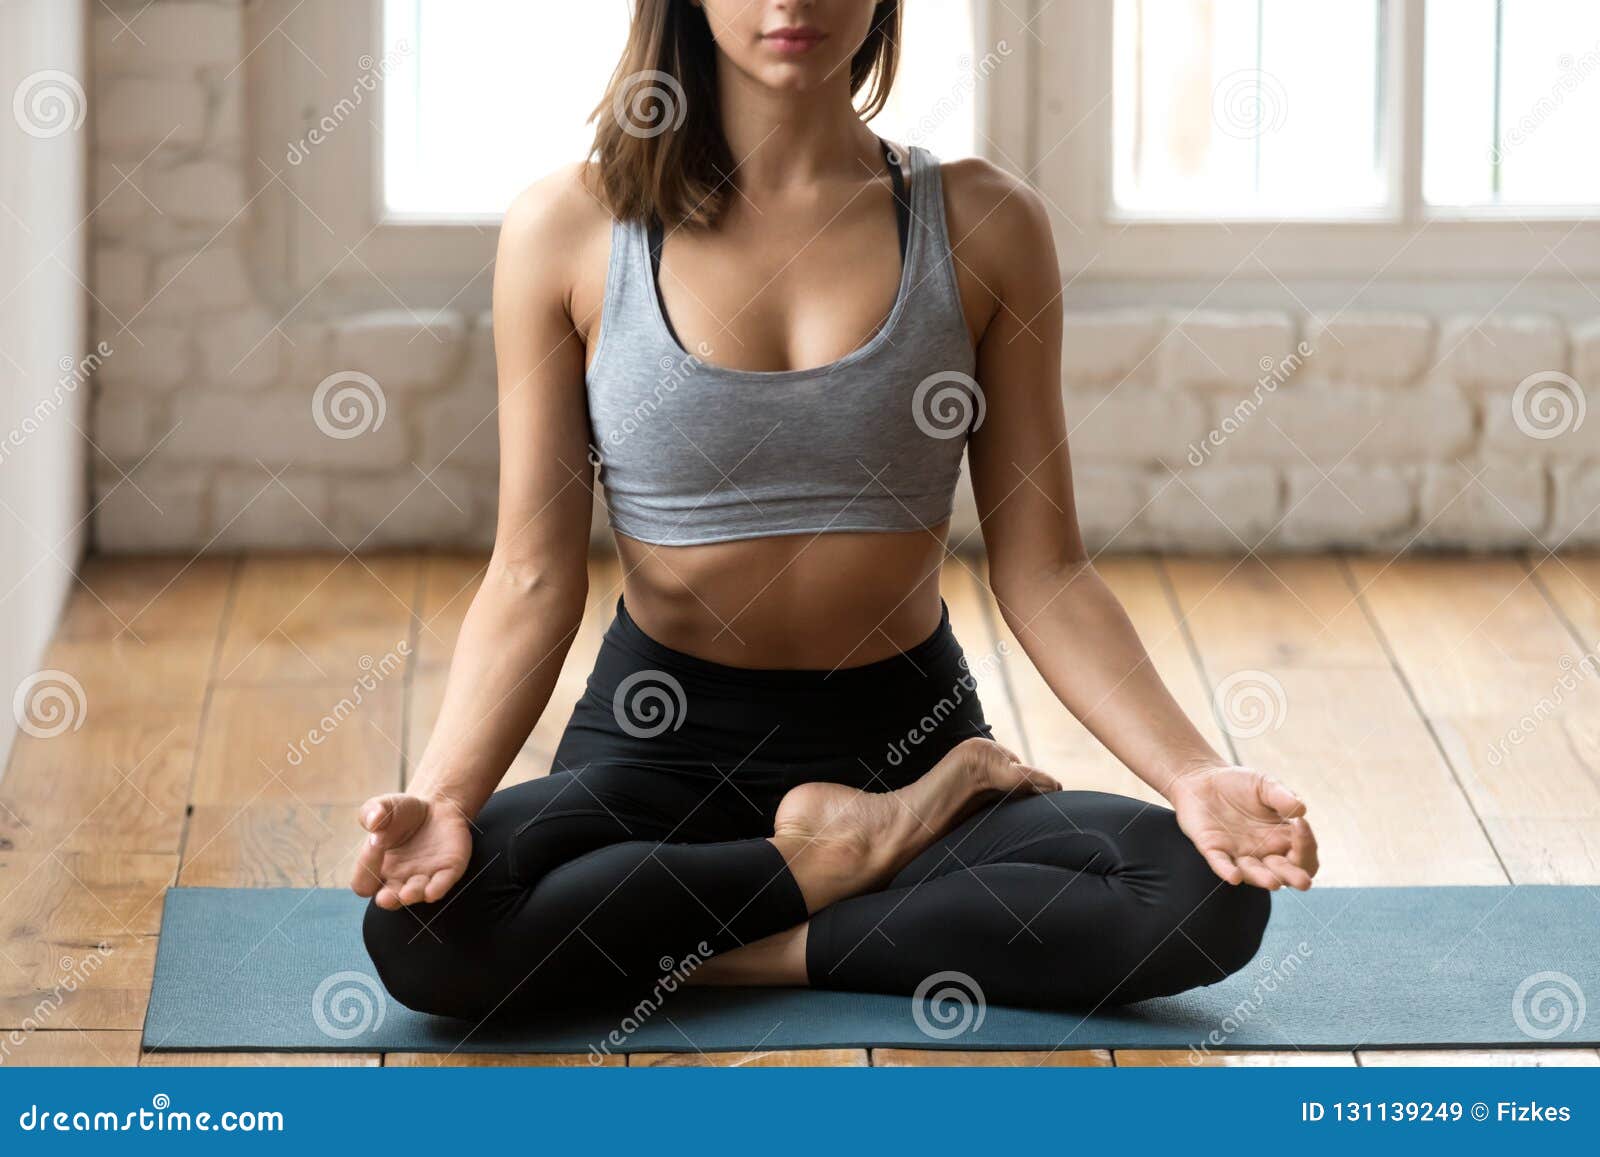 Young Woman Meditating In Half Lotus Pose With Mudra Gesture Stock